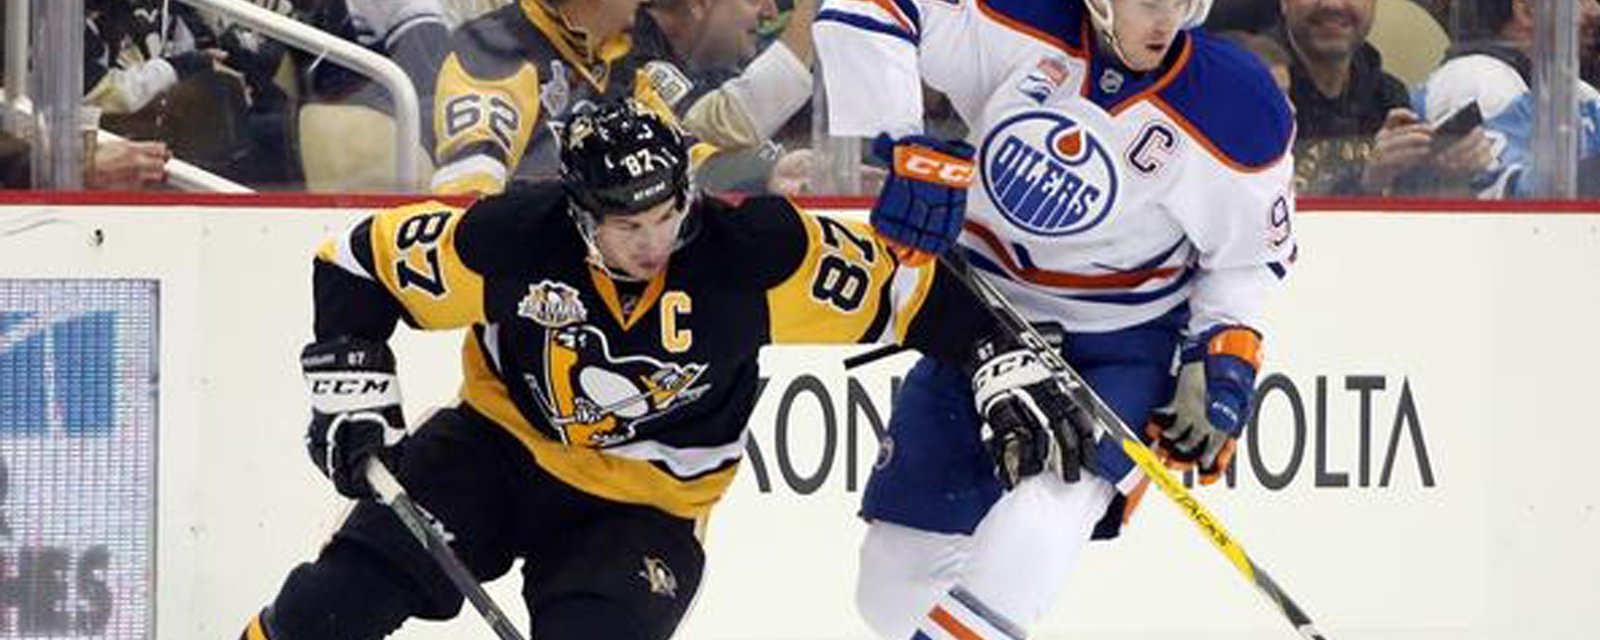 Pens coach offers up scathing criticism of Oilers organization